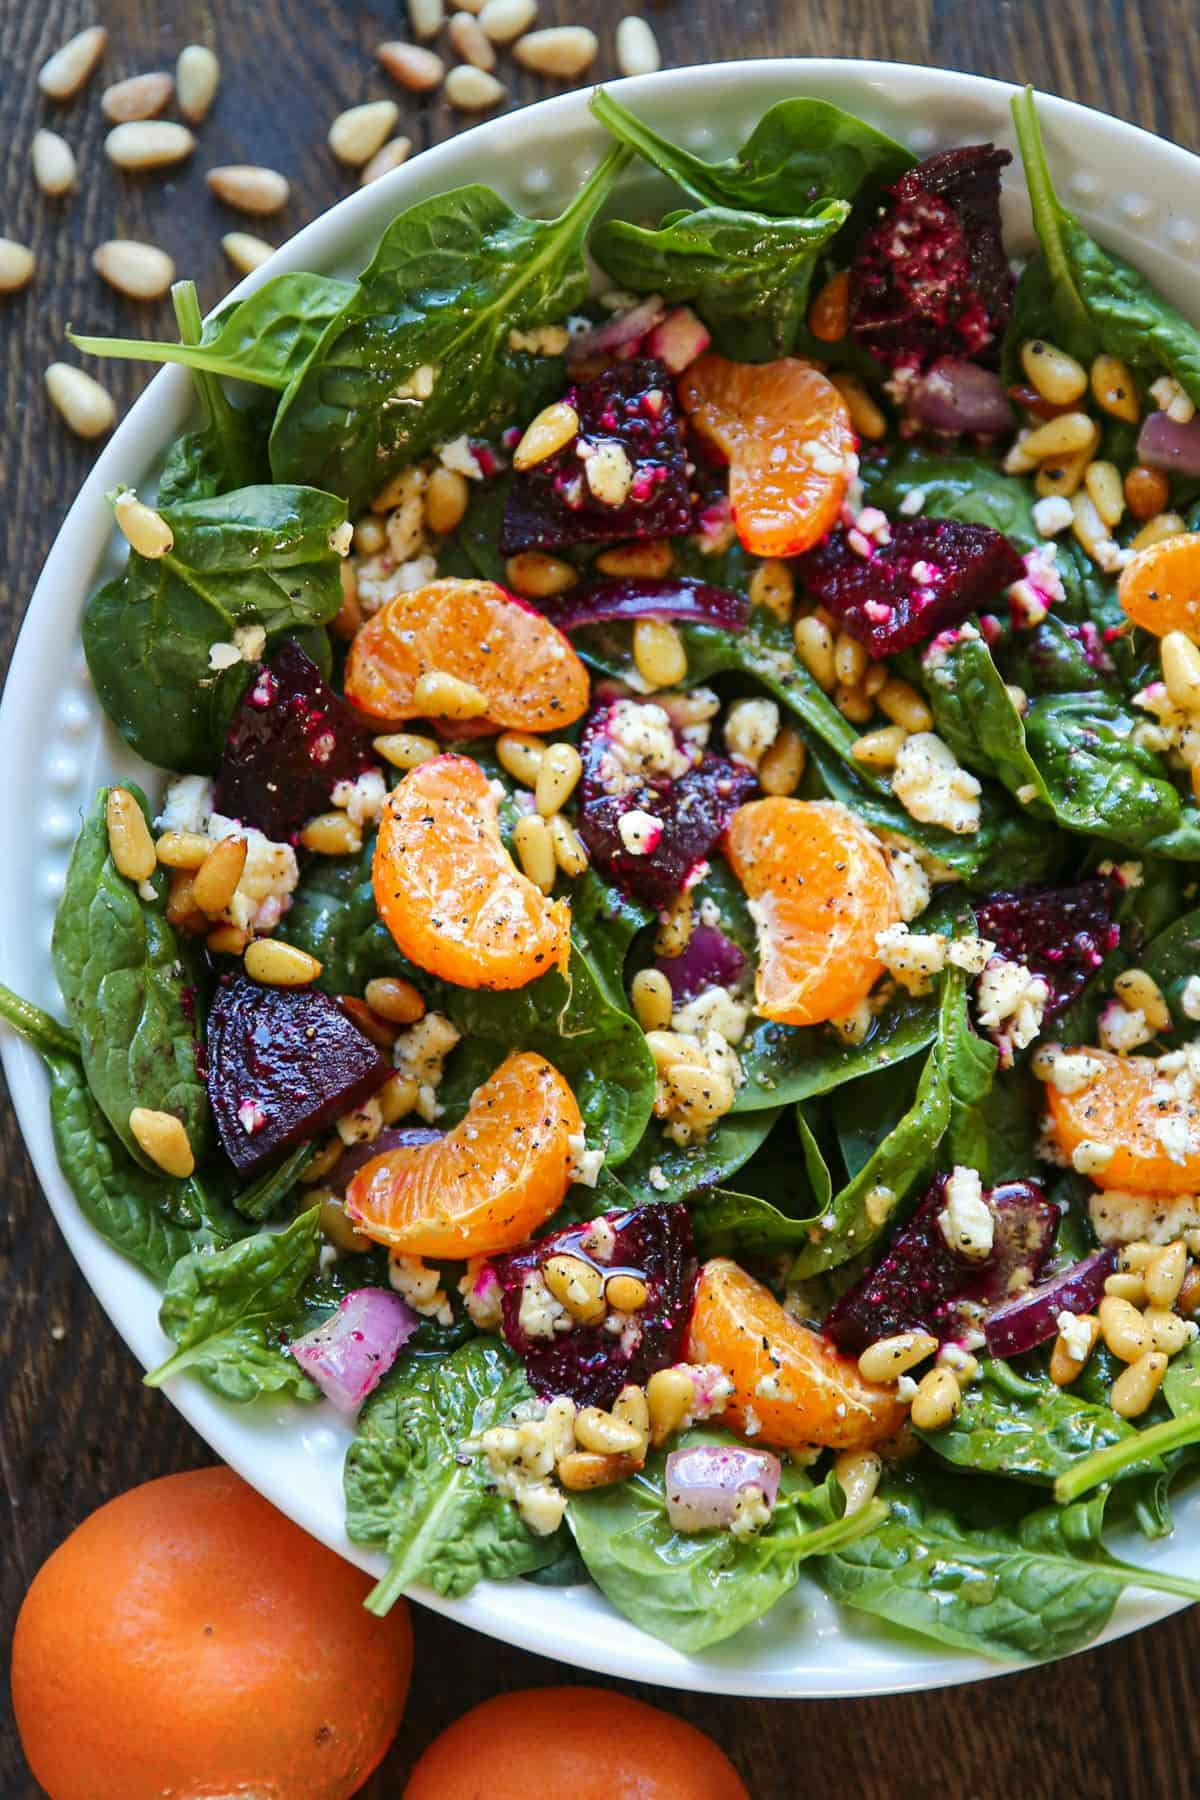 Spinach and Beet Salad with Mandarin Oranges, Feta, Pine Nuts, and Honey-Mustard Lemon Dressing